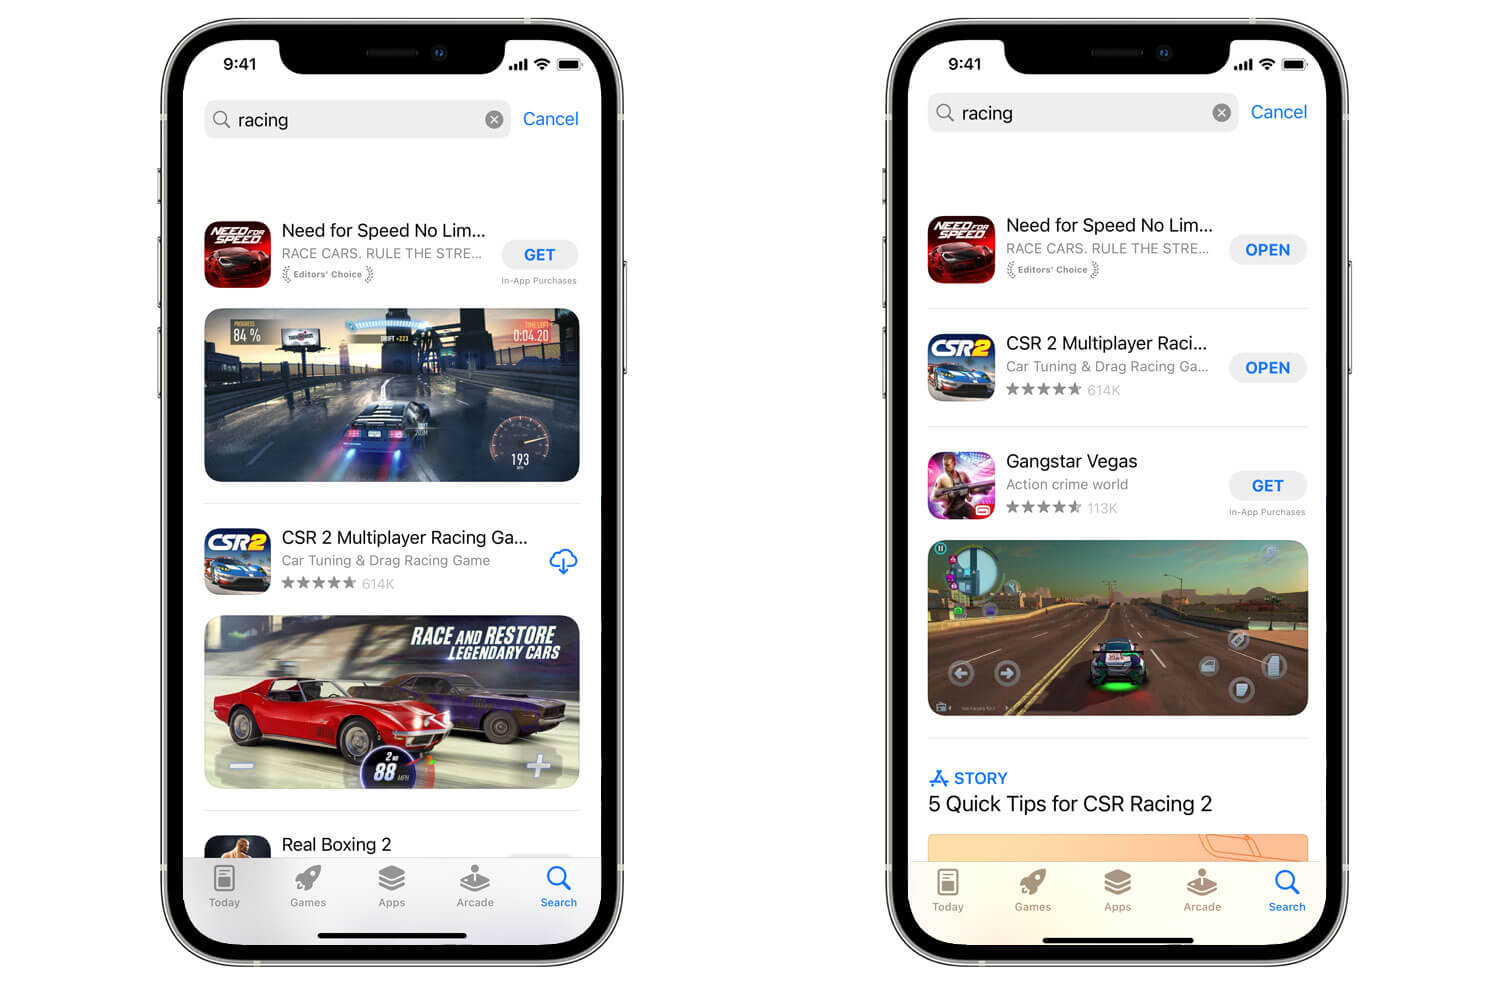 iOS 15 brings more search results to the App Store